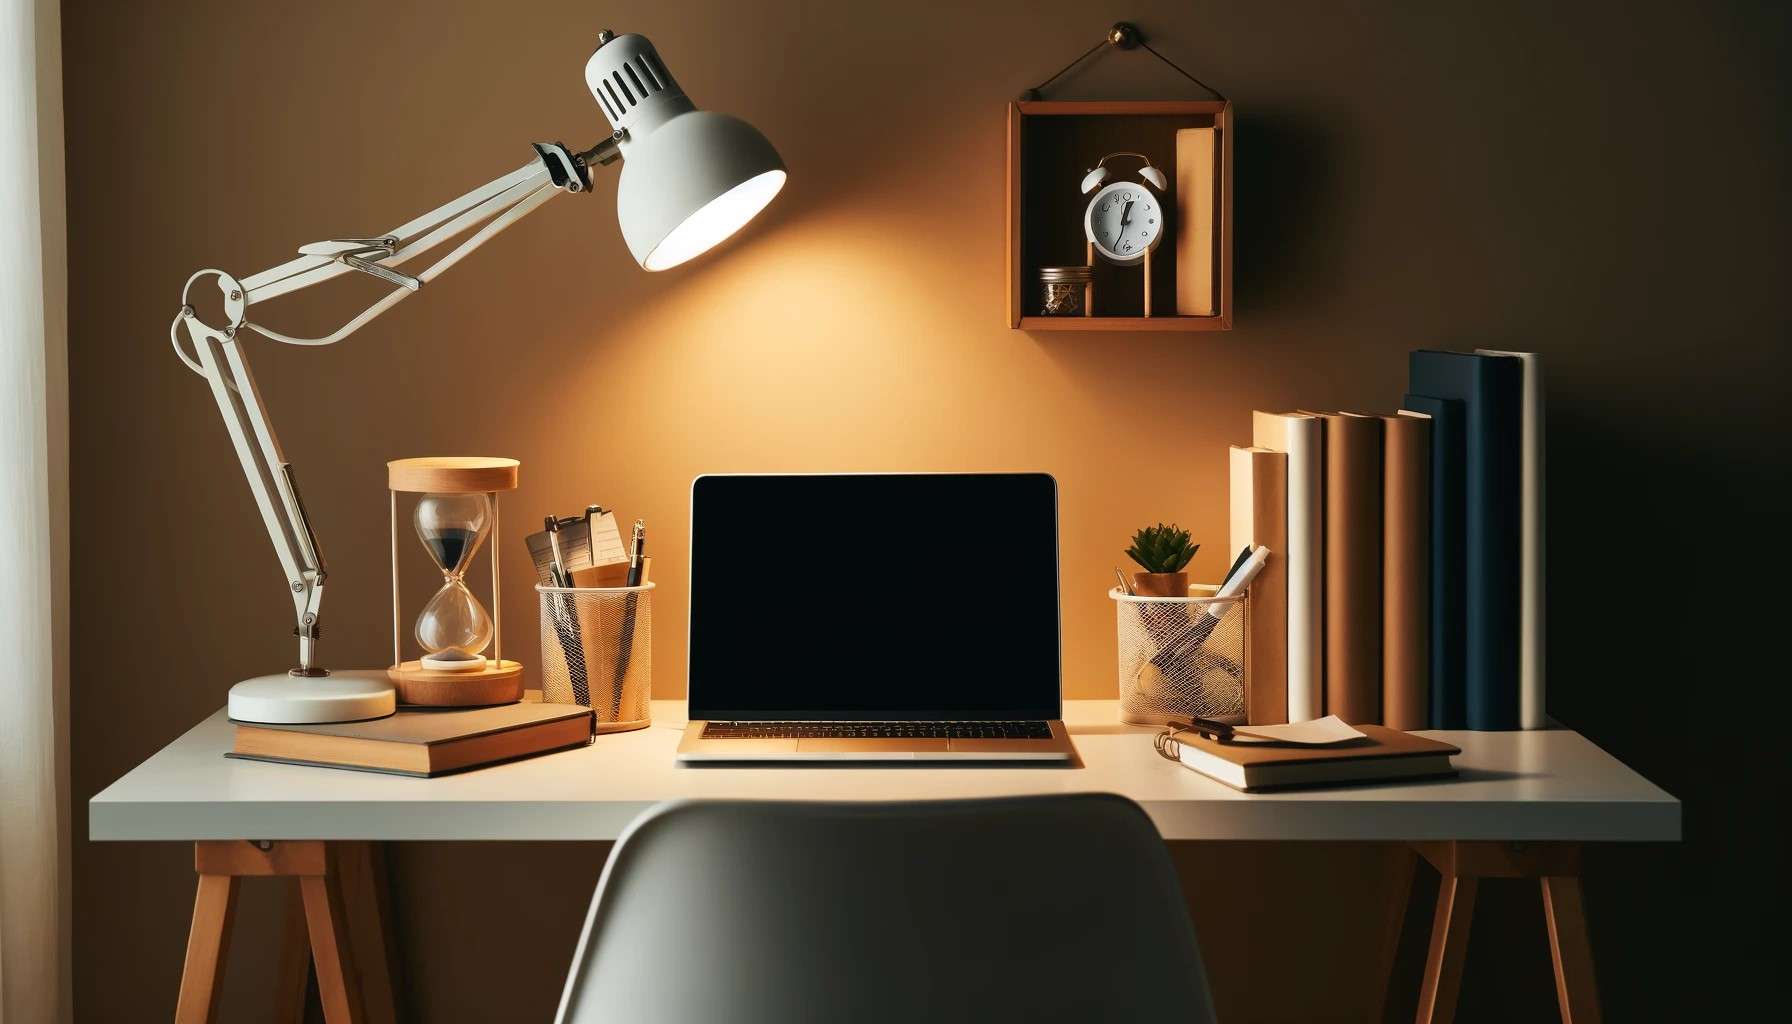 Must-Haves for Your Study Table According to Vastu Principles